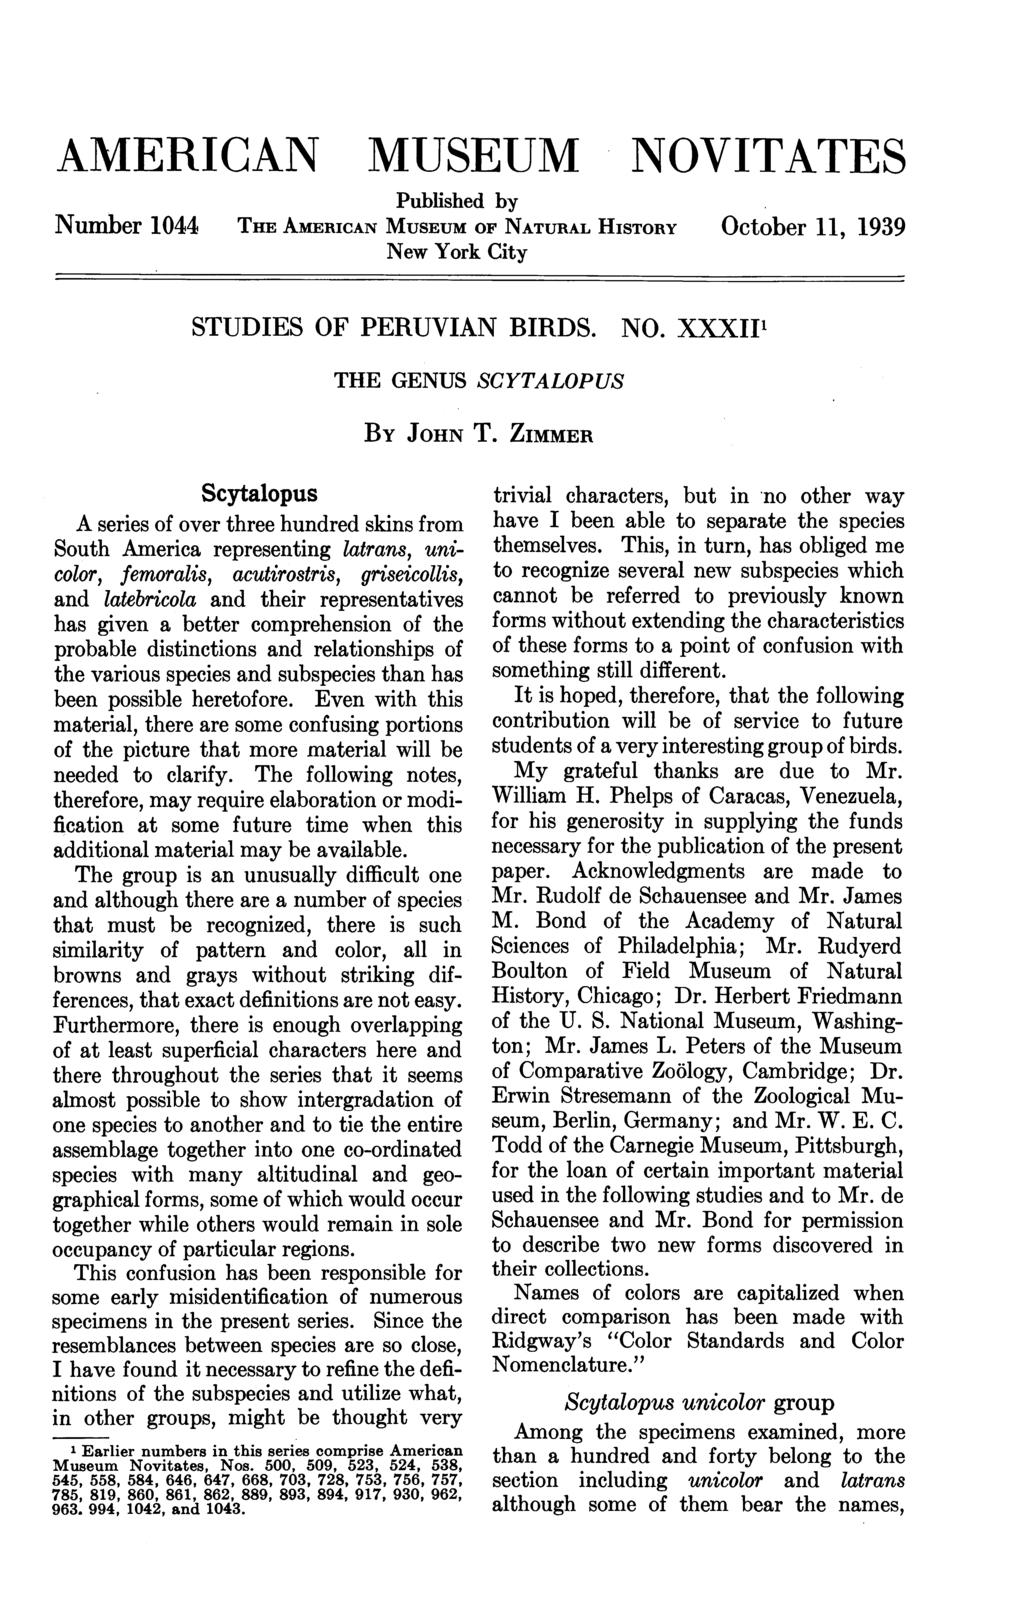 AMIERICAN MUSEUM NOVITATES Published by Number 1044 THE AMERICAN MUSEUM OF NATURAL HISTORY October 11, 1939 New York City STUDIES OF PERUVIAN BIRDS. THE GENUS SCYTALOPUS BY JOHN T.